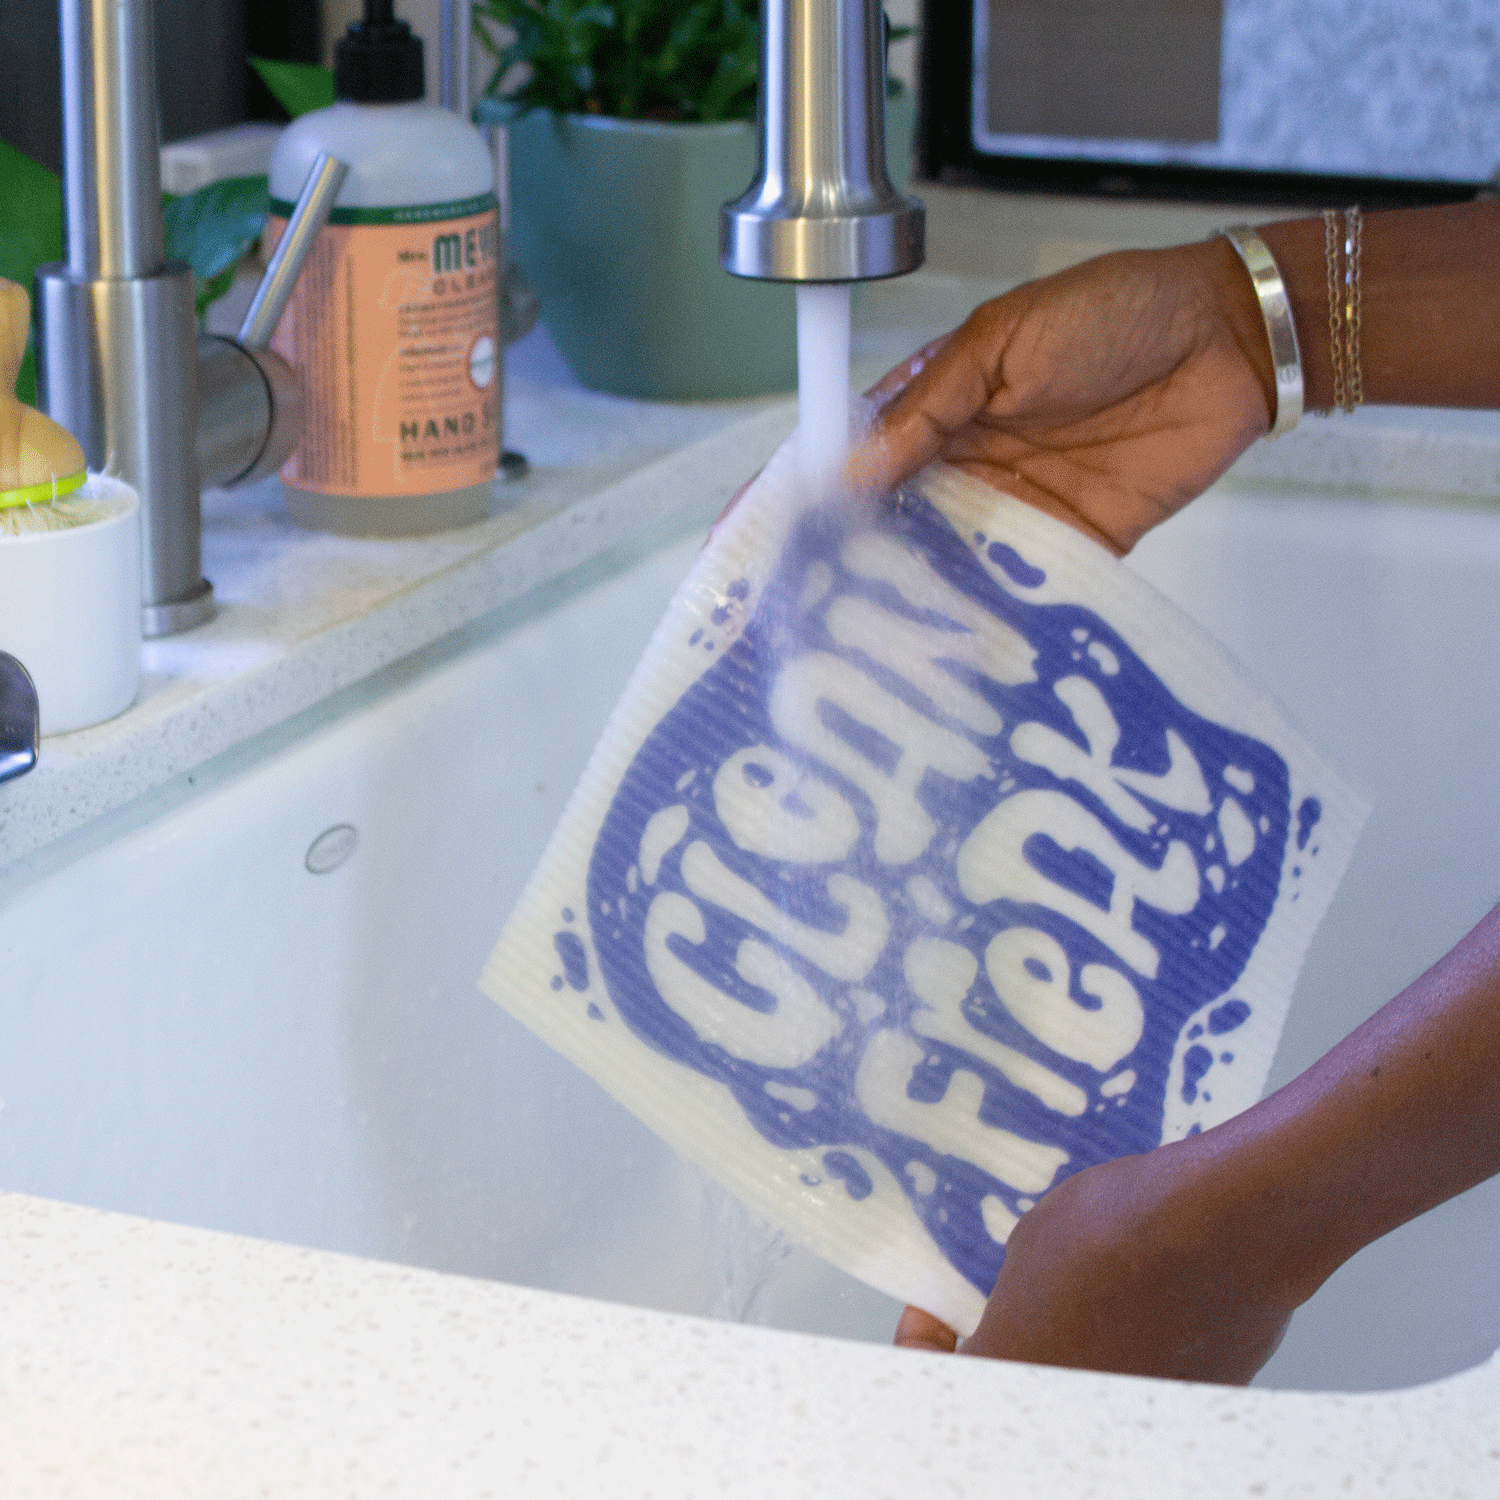 Two hands hold the Clean Freak Super Cloth under a running kitchen faucet. The blue and white clean freak print is partially obscured by the running water.